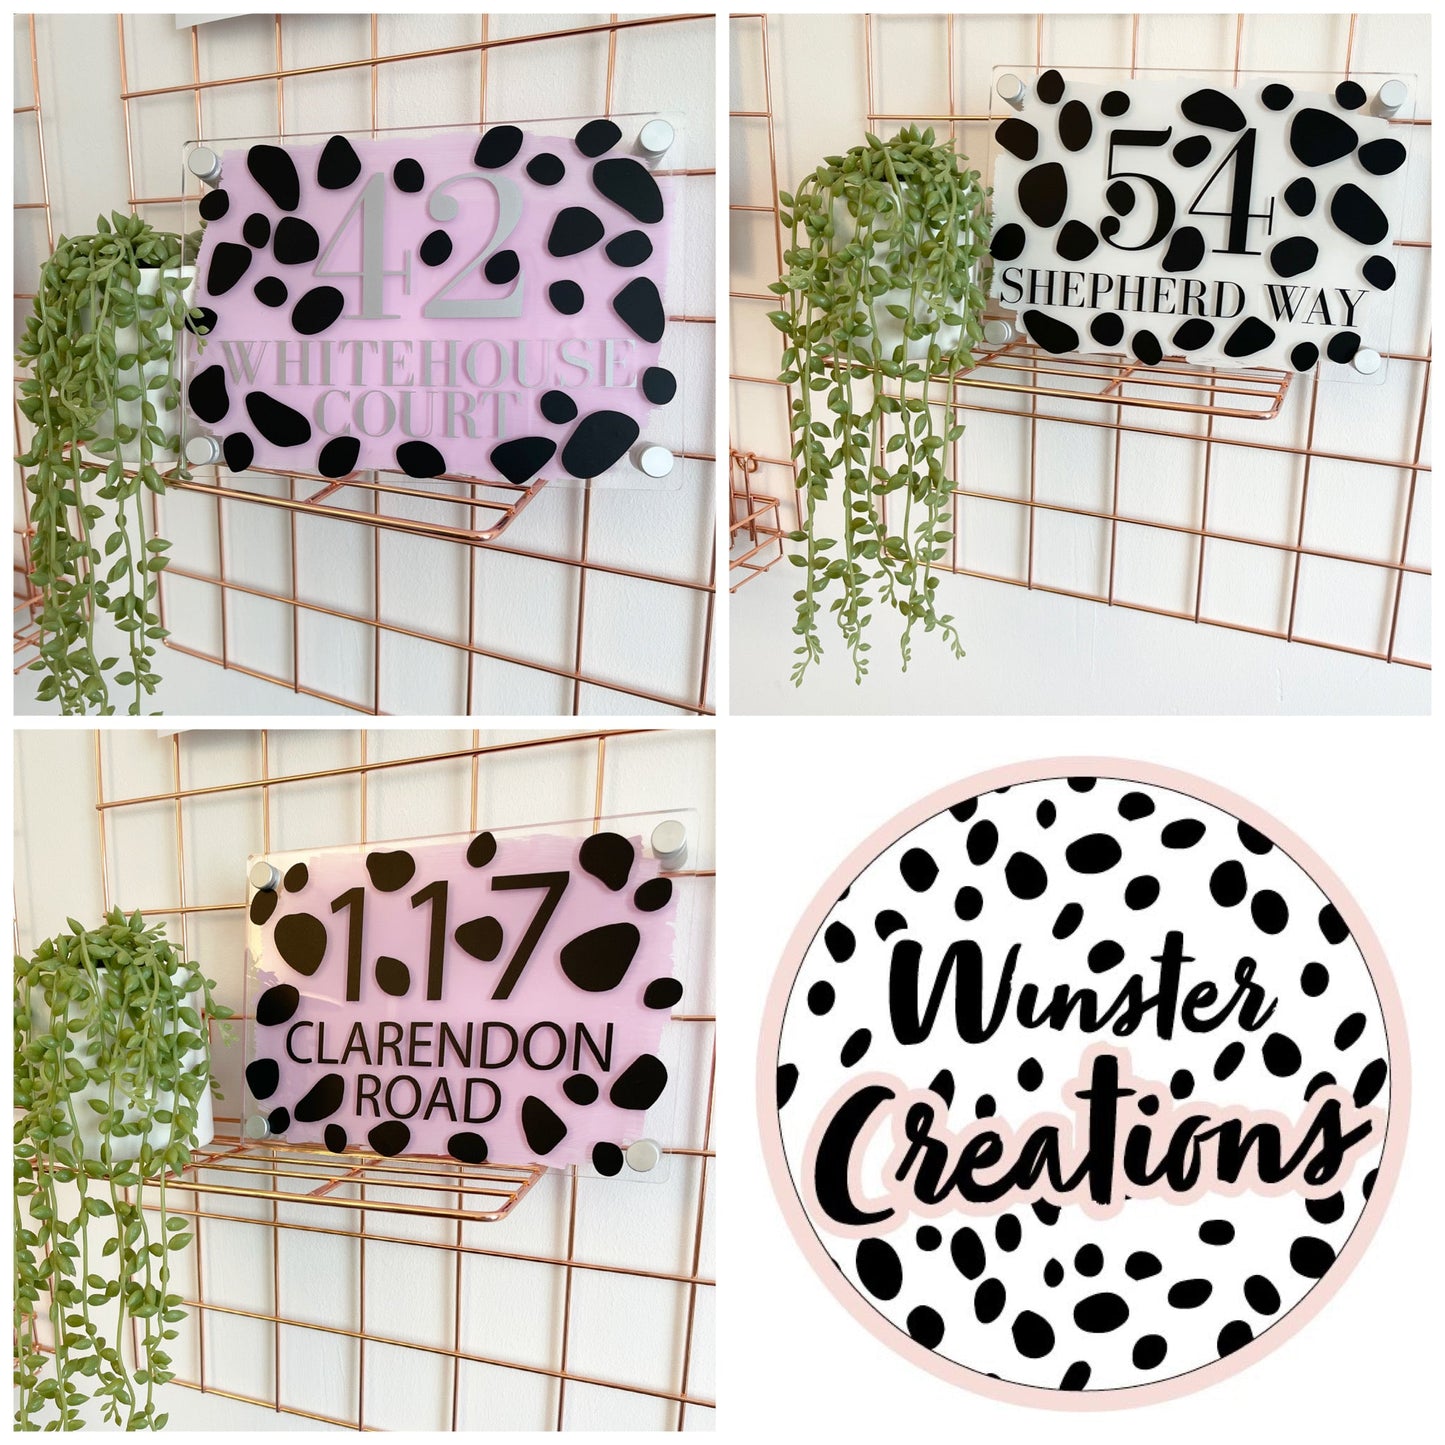 Dalmatian Design House Name/Number High Quality Acrylic Outdoor Or Inside Sign Including Fixtures & Standoffs - Assorted Colours & Fonts (See Images)